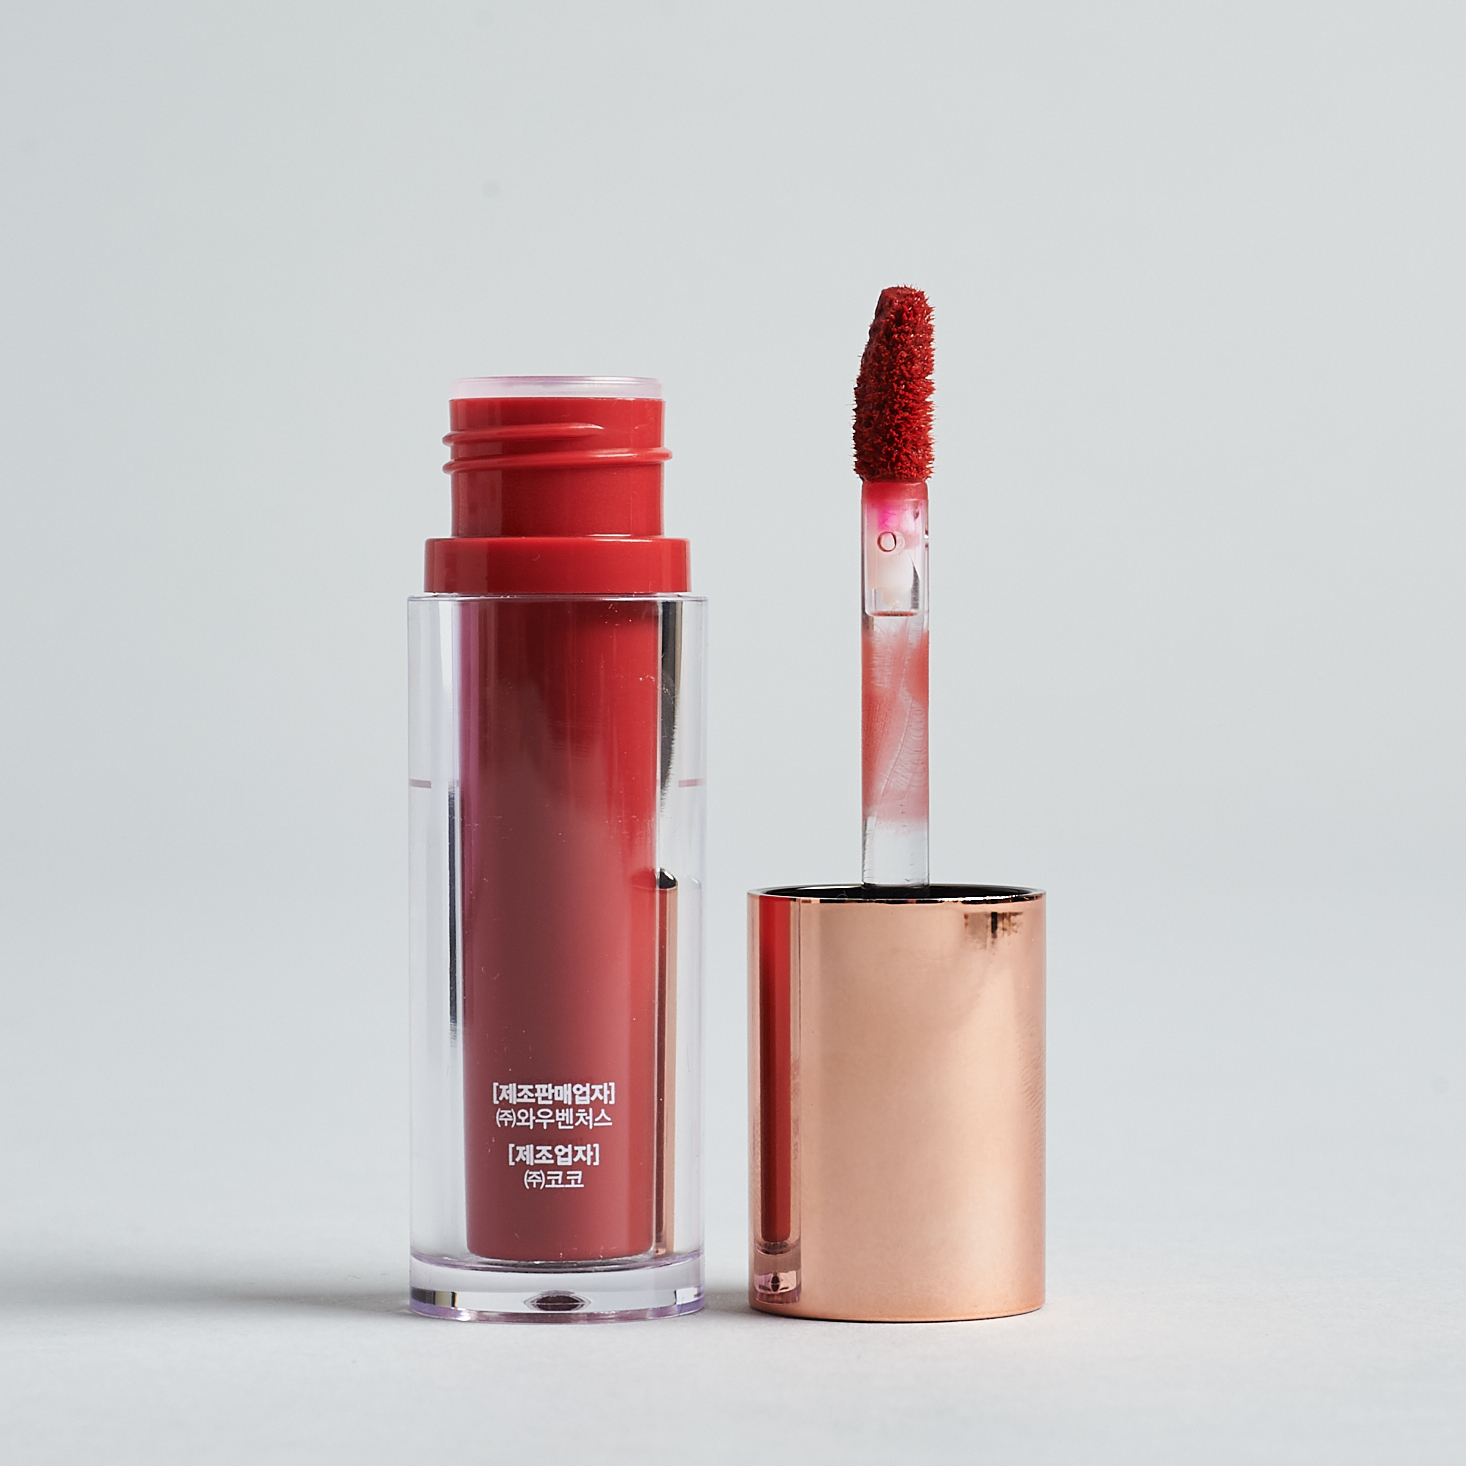 open W. Lab Selfie Velvet Lip Tint with wand next to bottle